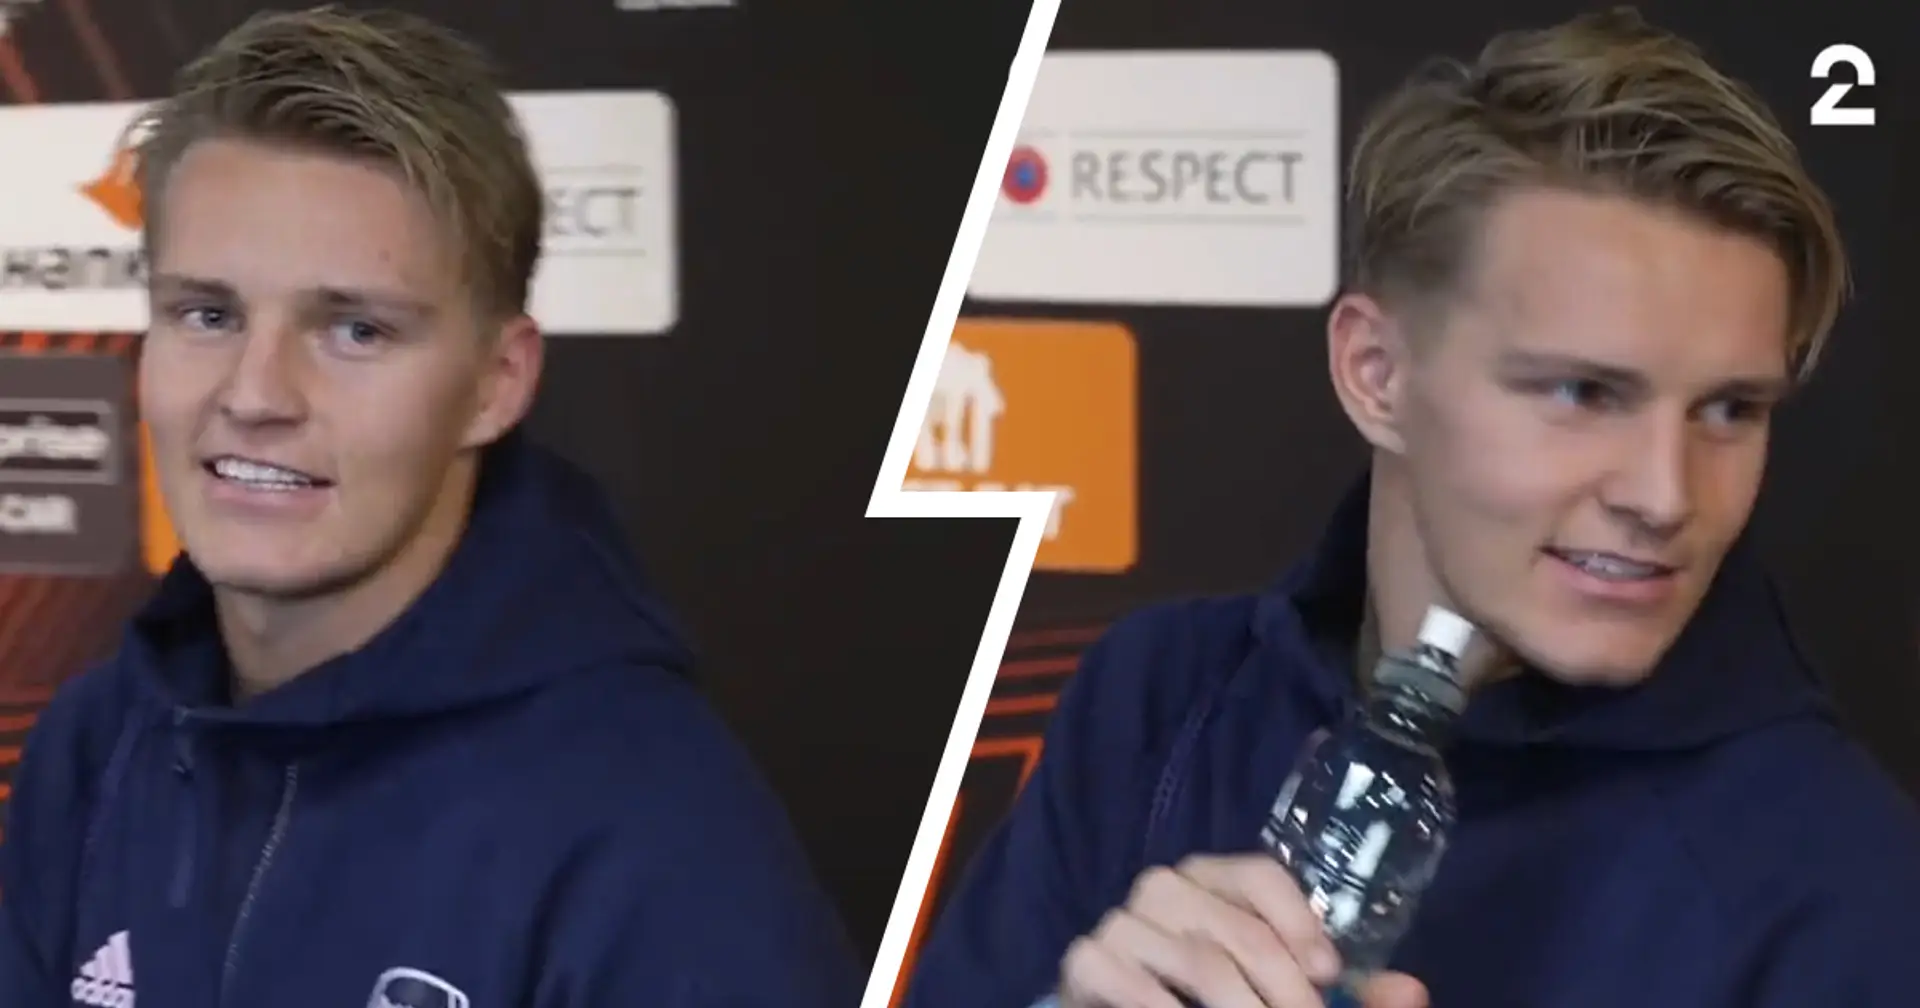 Caught on camera: Martin Odegaard greeted with gift from reporter after Bodo/Glimt win